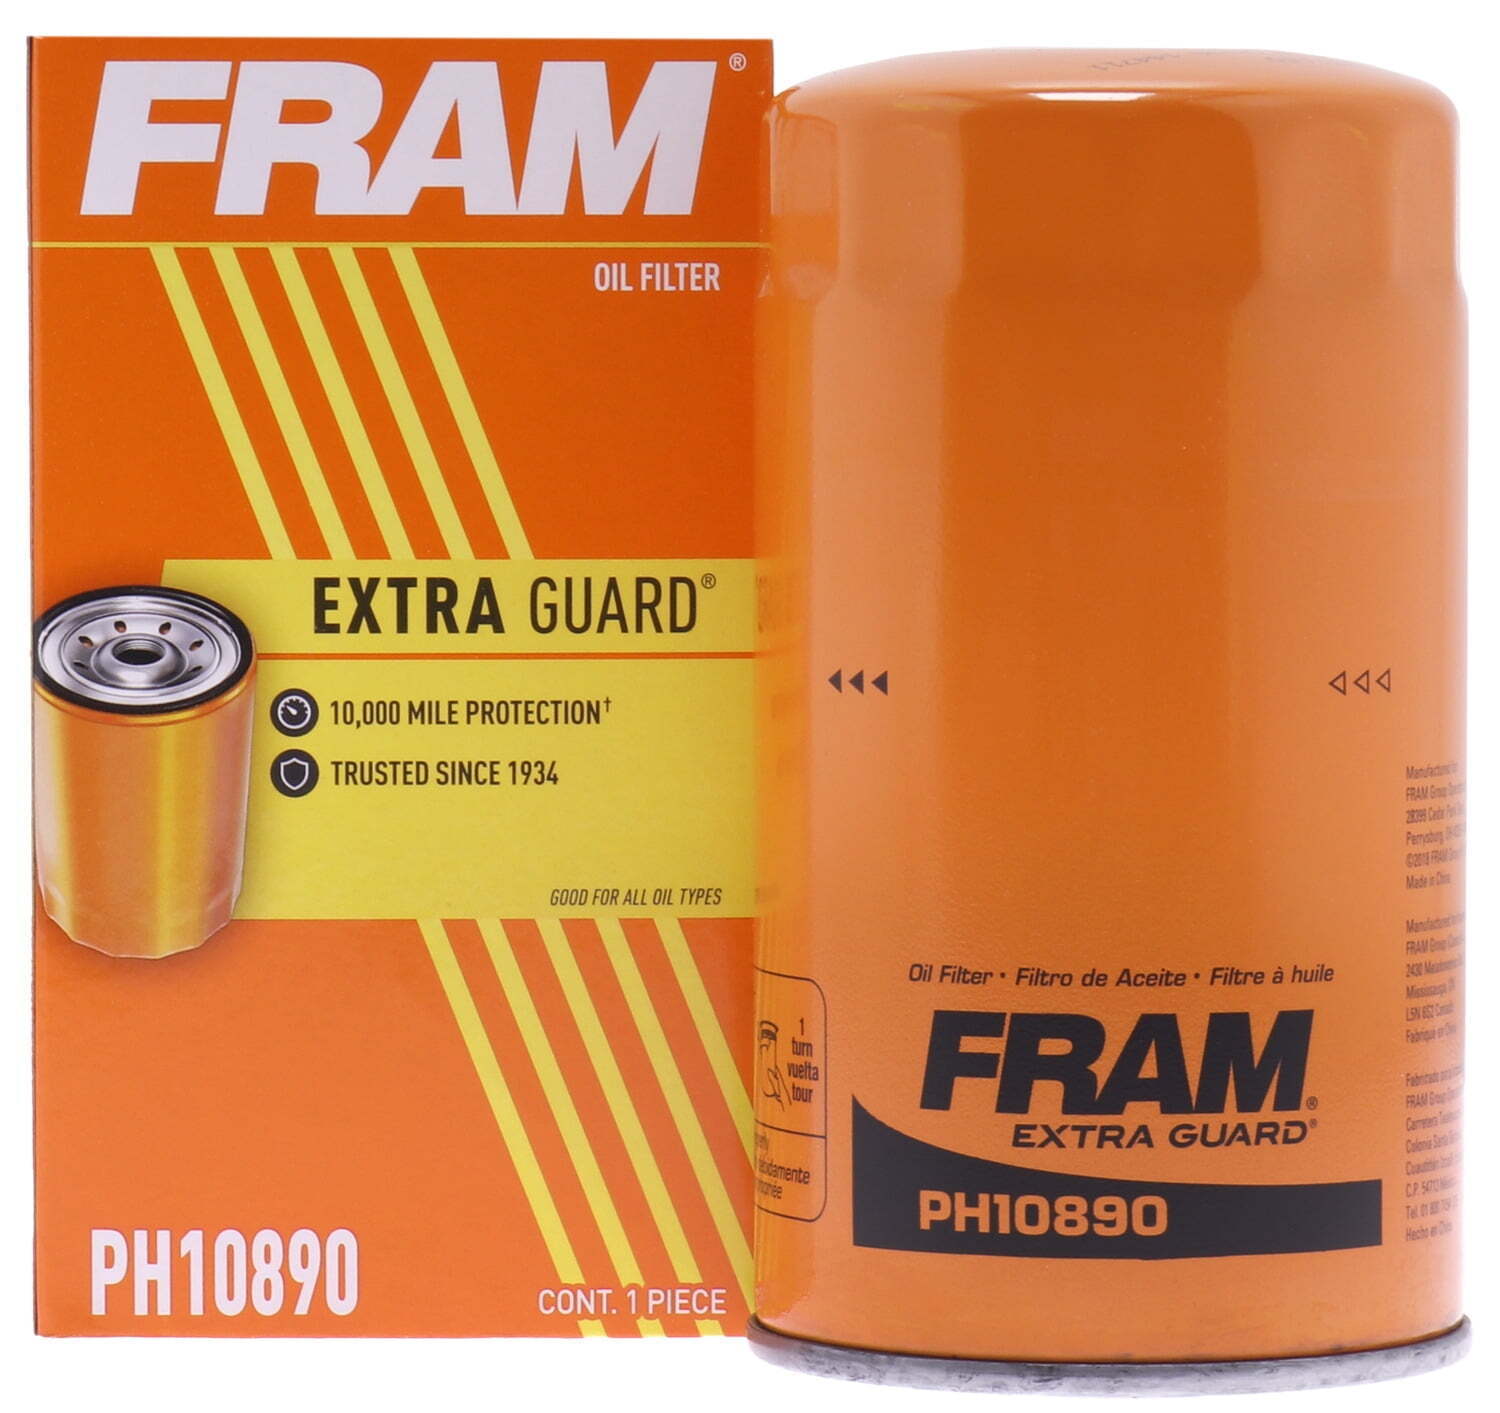 Extra Guard Oil Filter, PH10890, 10K mile Filter for Select Ford Vehicles